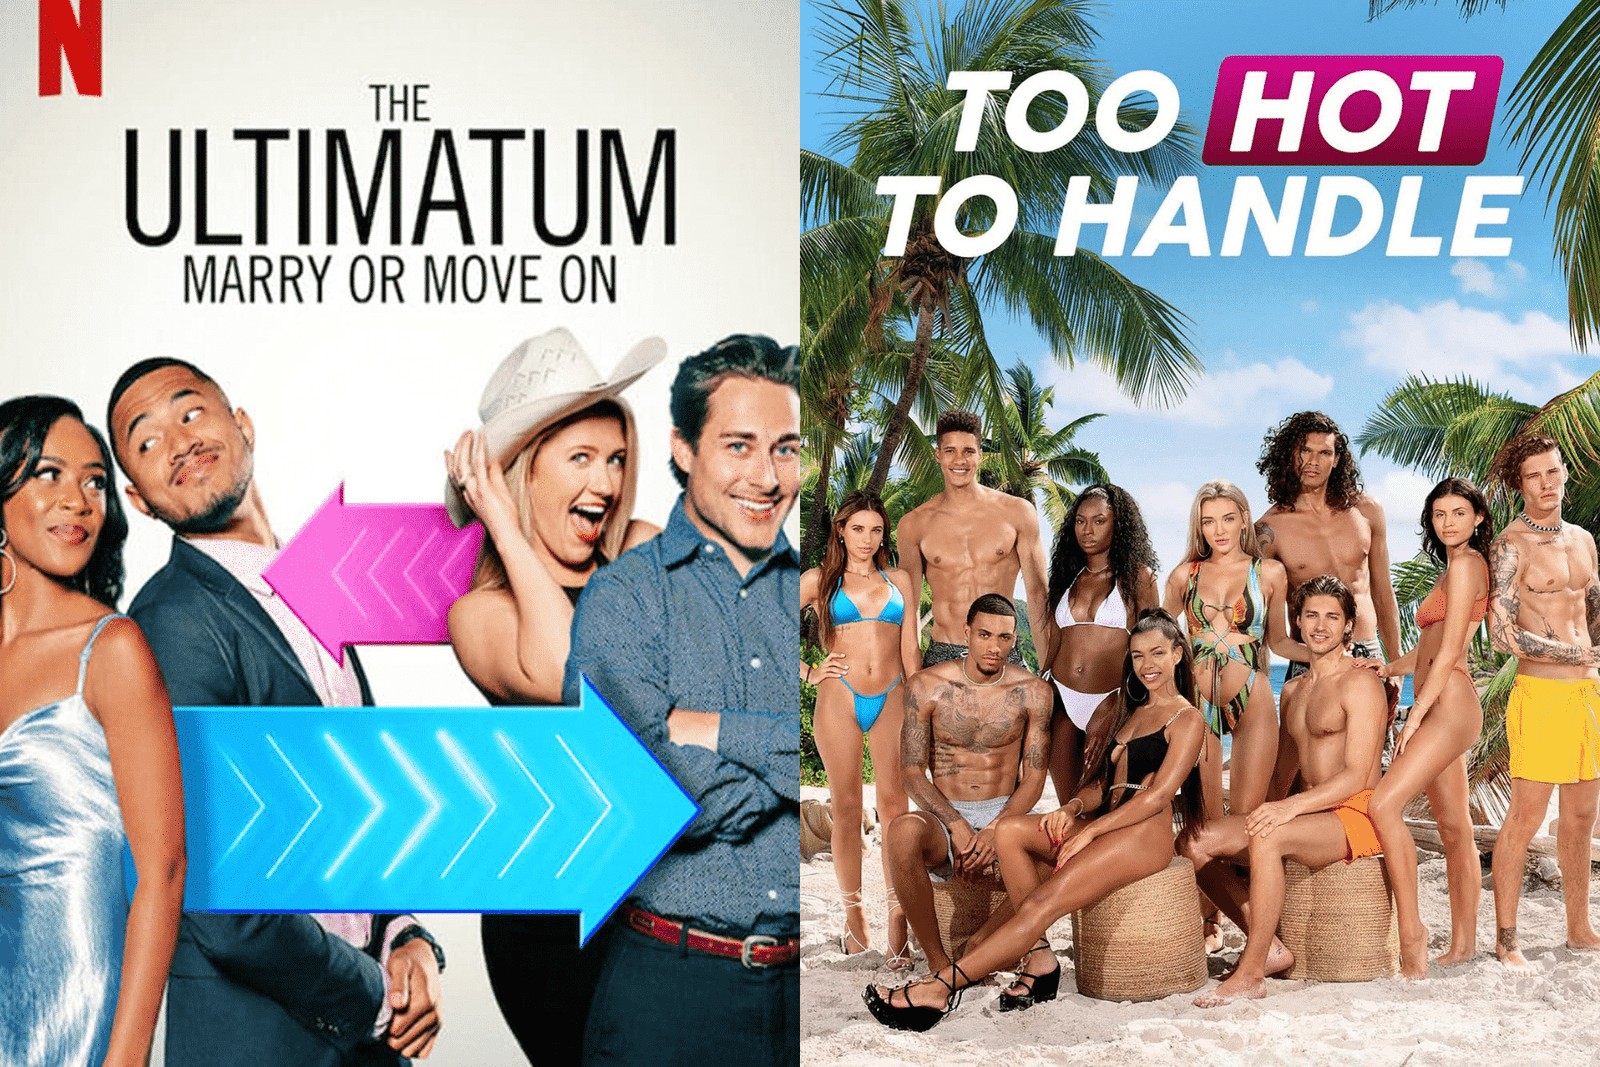 Similarities Between The Ultimatum and Too Hot to Handle